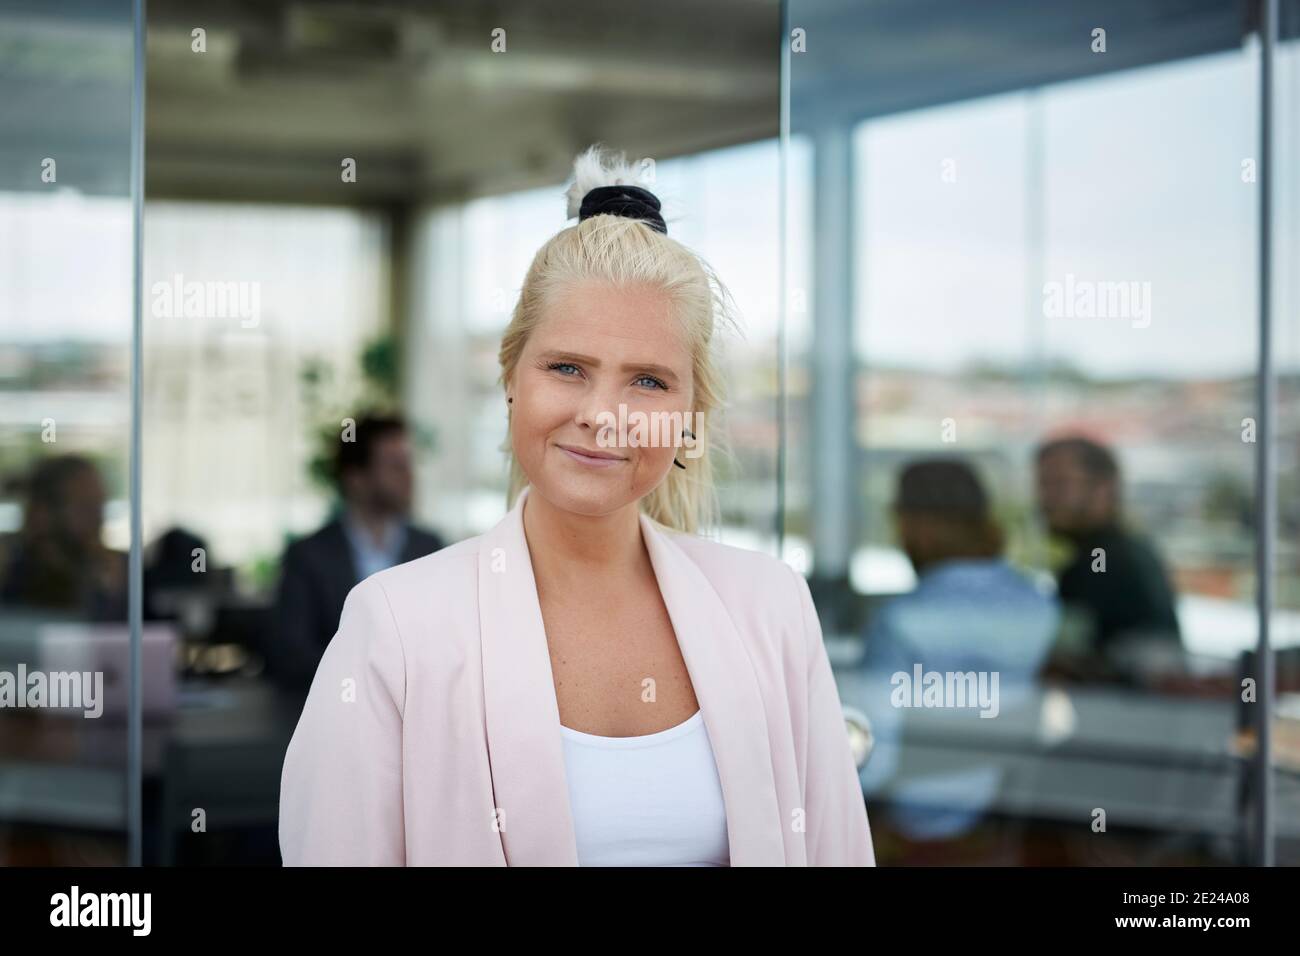 Smiling businesswoman looking at camera Banque D'Images